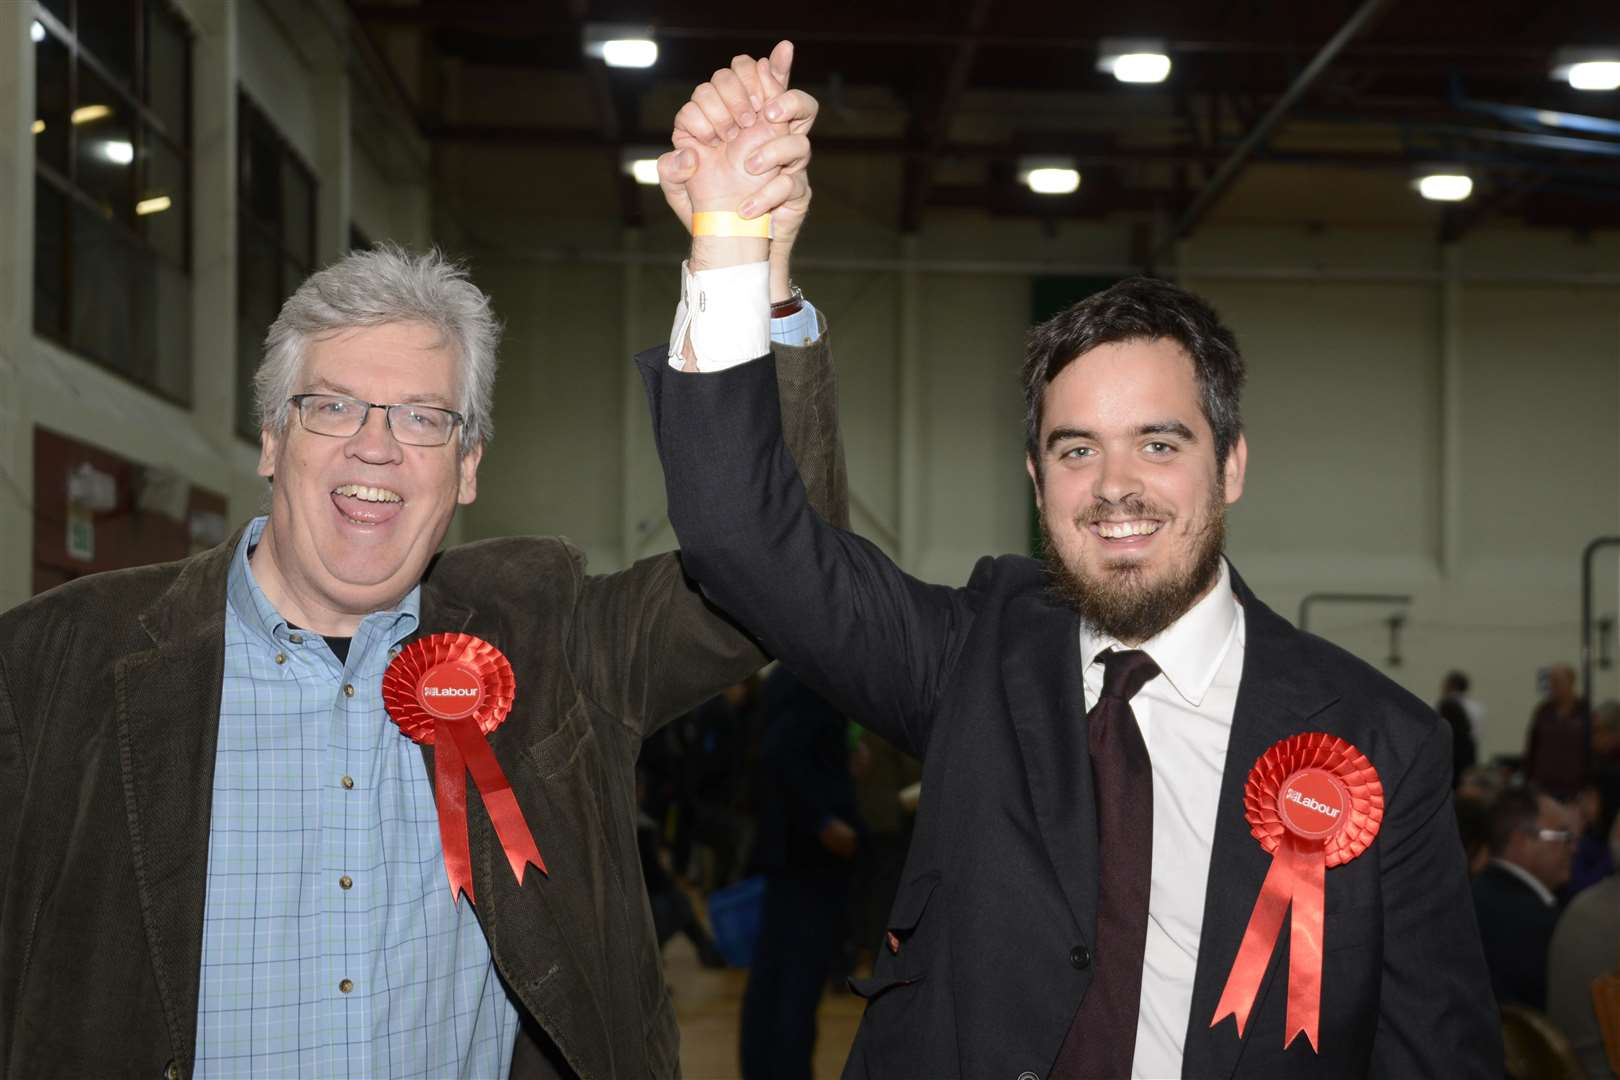 Proud dad David Ward with son Cllr Alexander Ward (Labour). Picture: Paul Amos